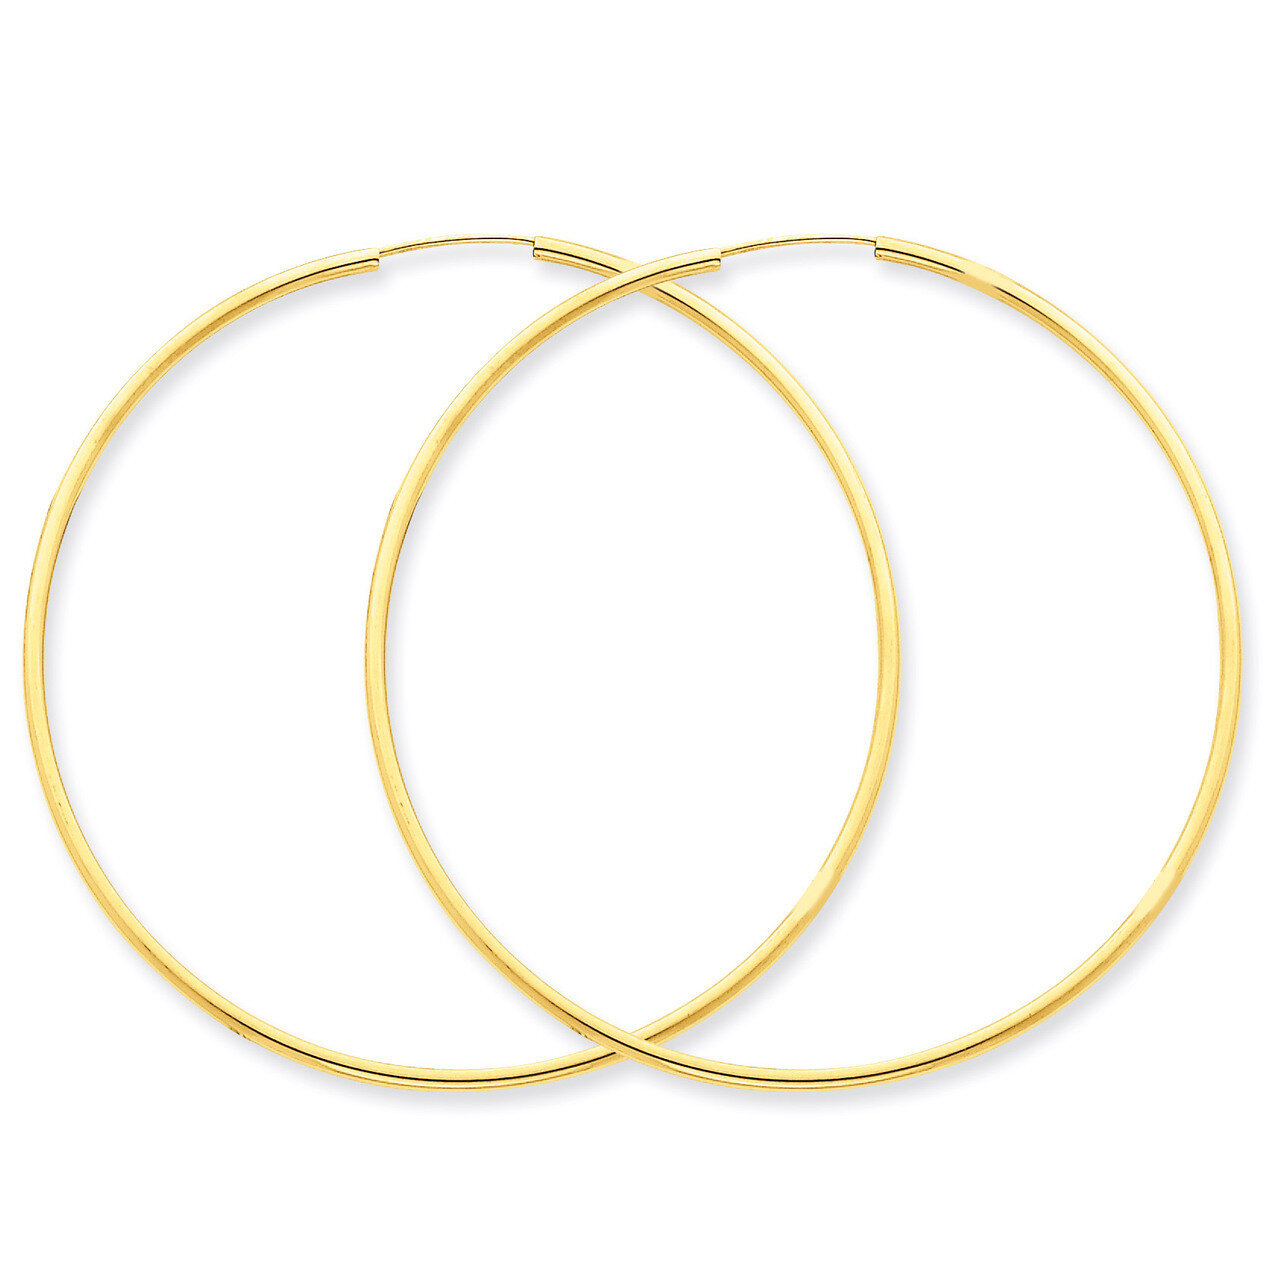 1.5mm Polished Round Endless Hoop Earrings 14k Gold XY1166